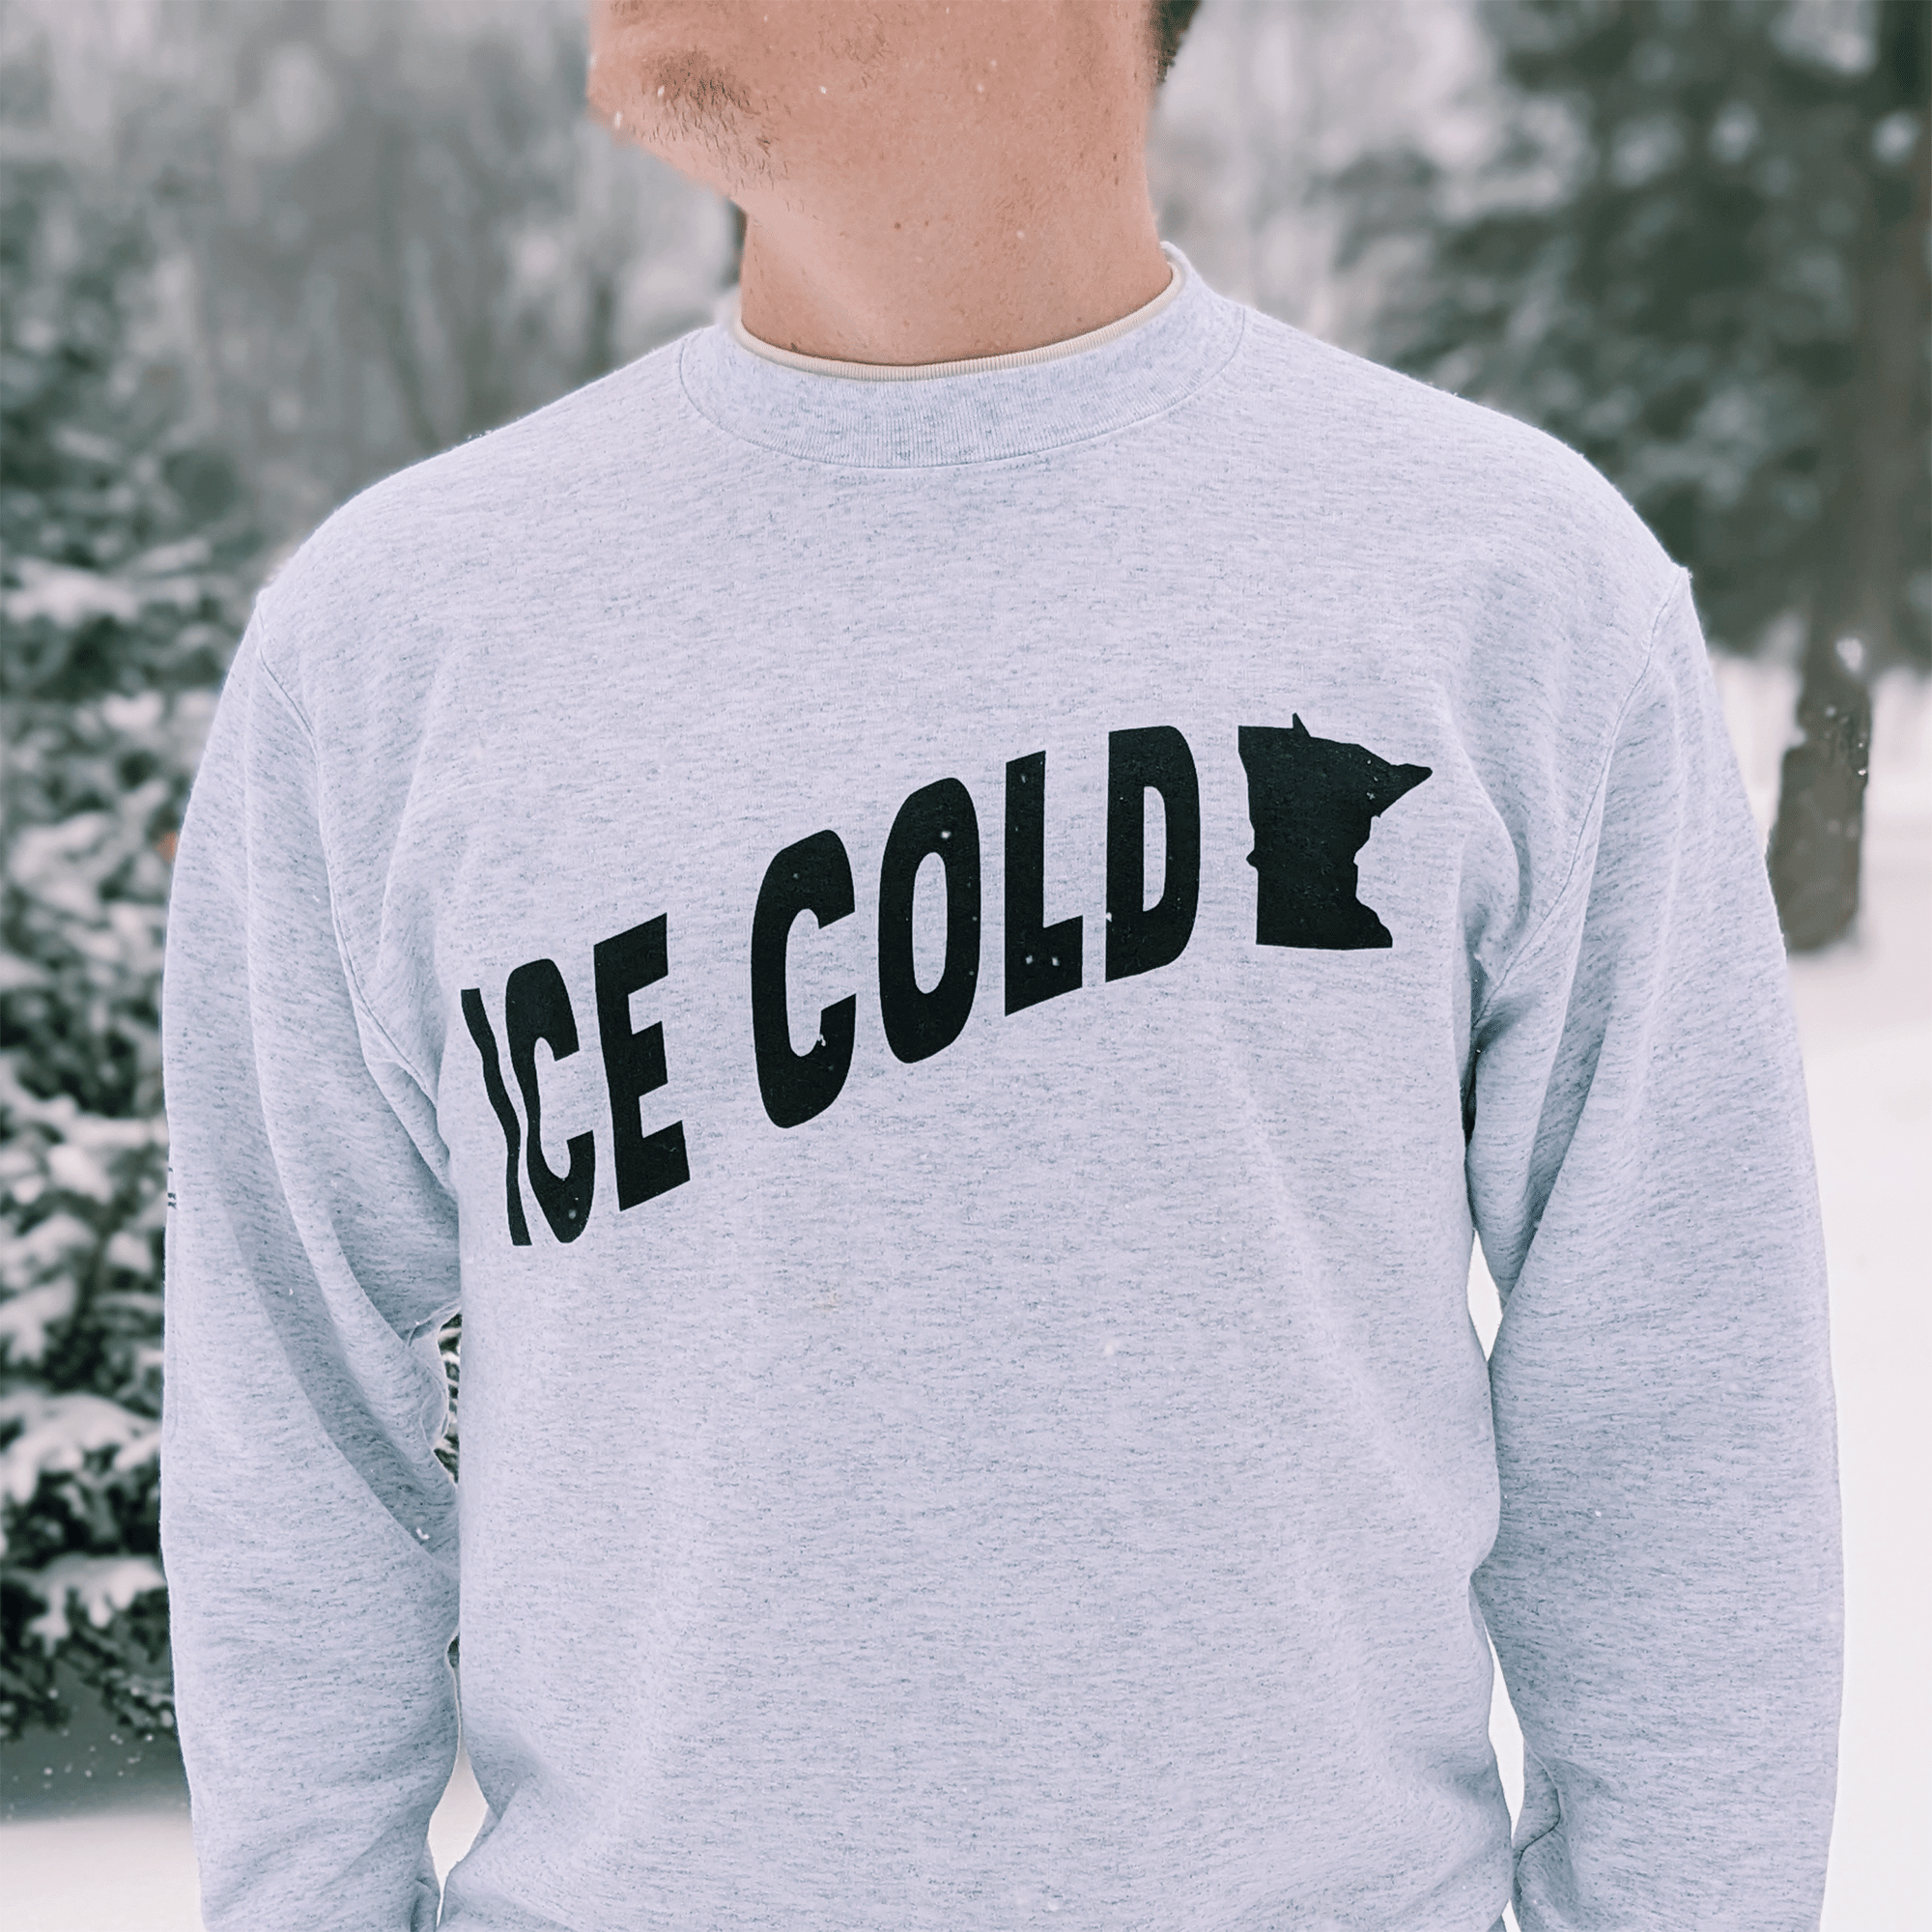 Sweatshirt that says Ice Cold on the front